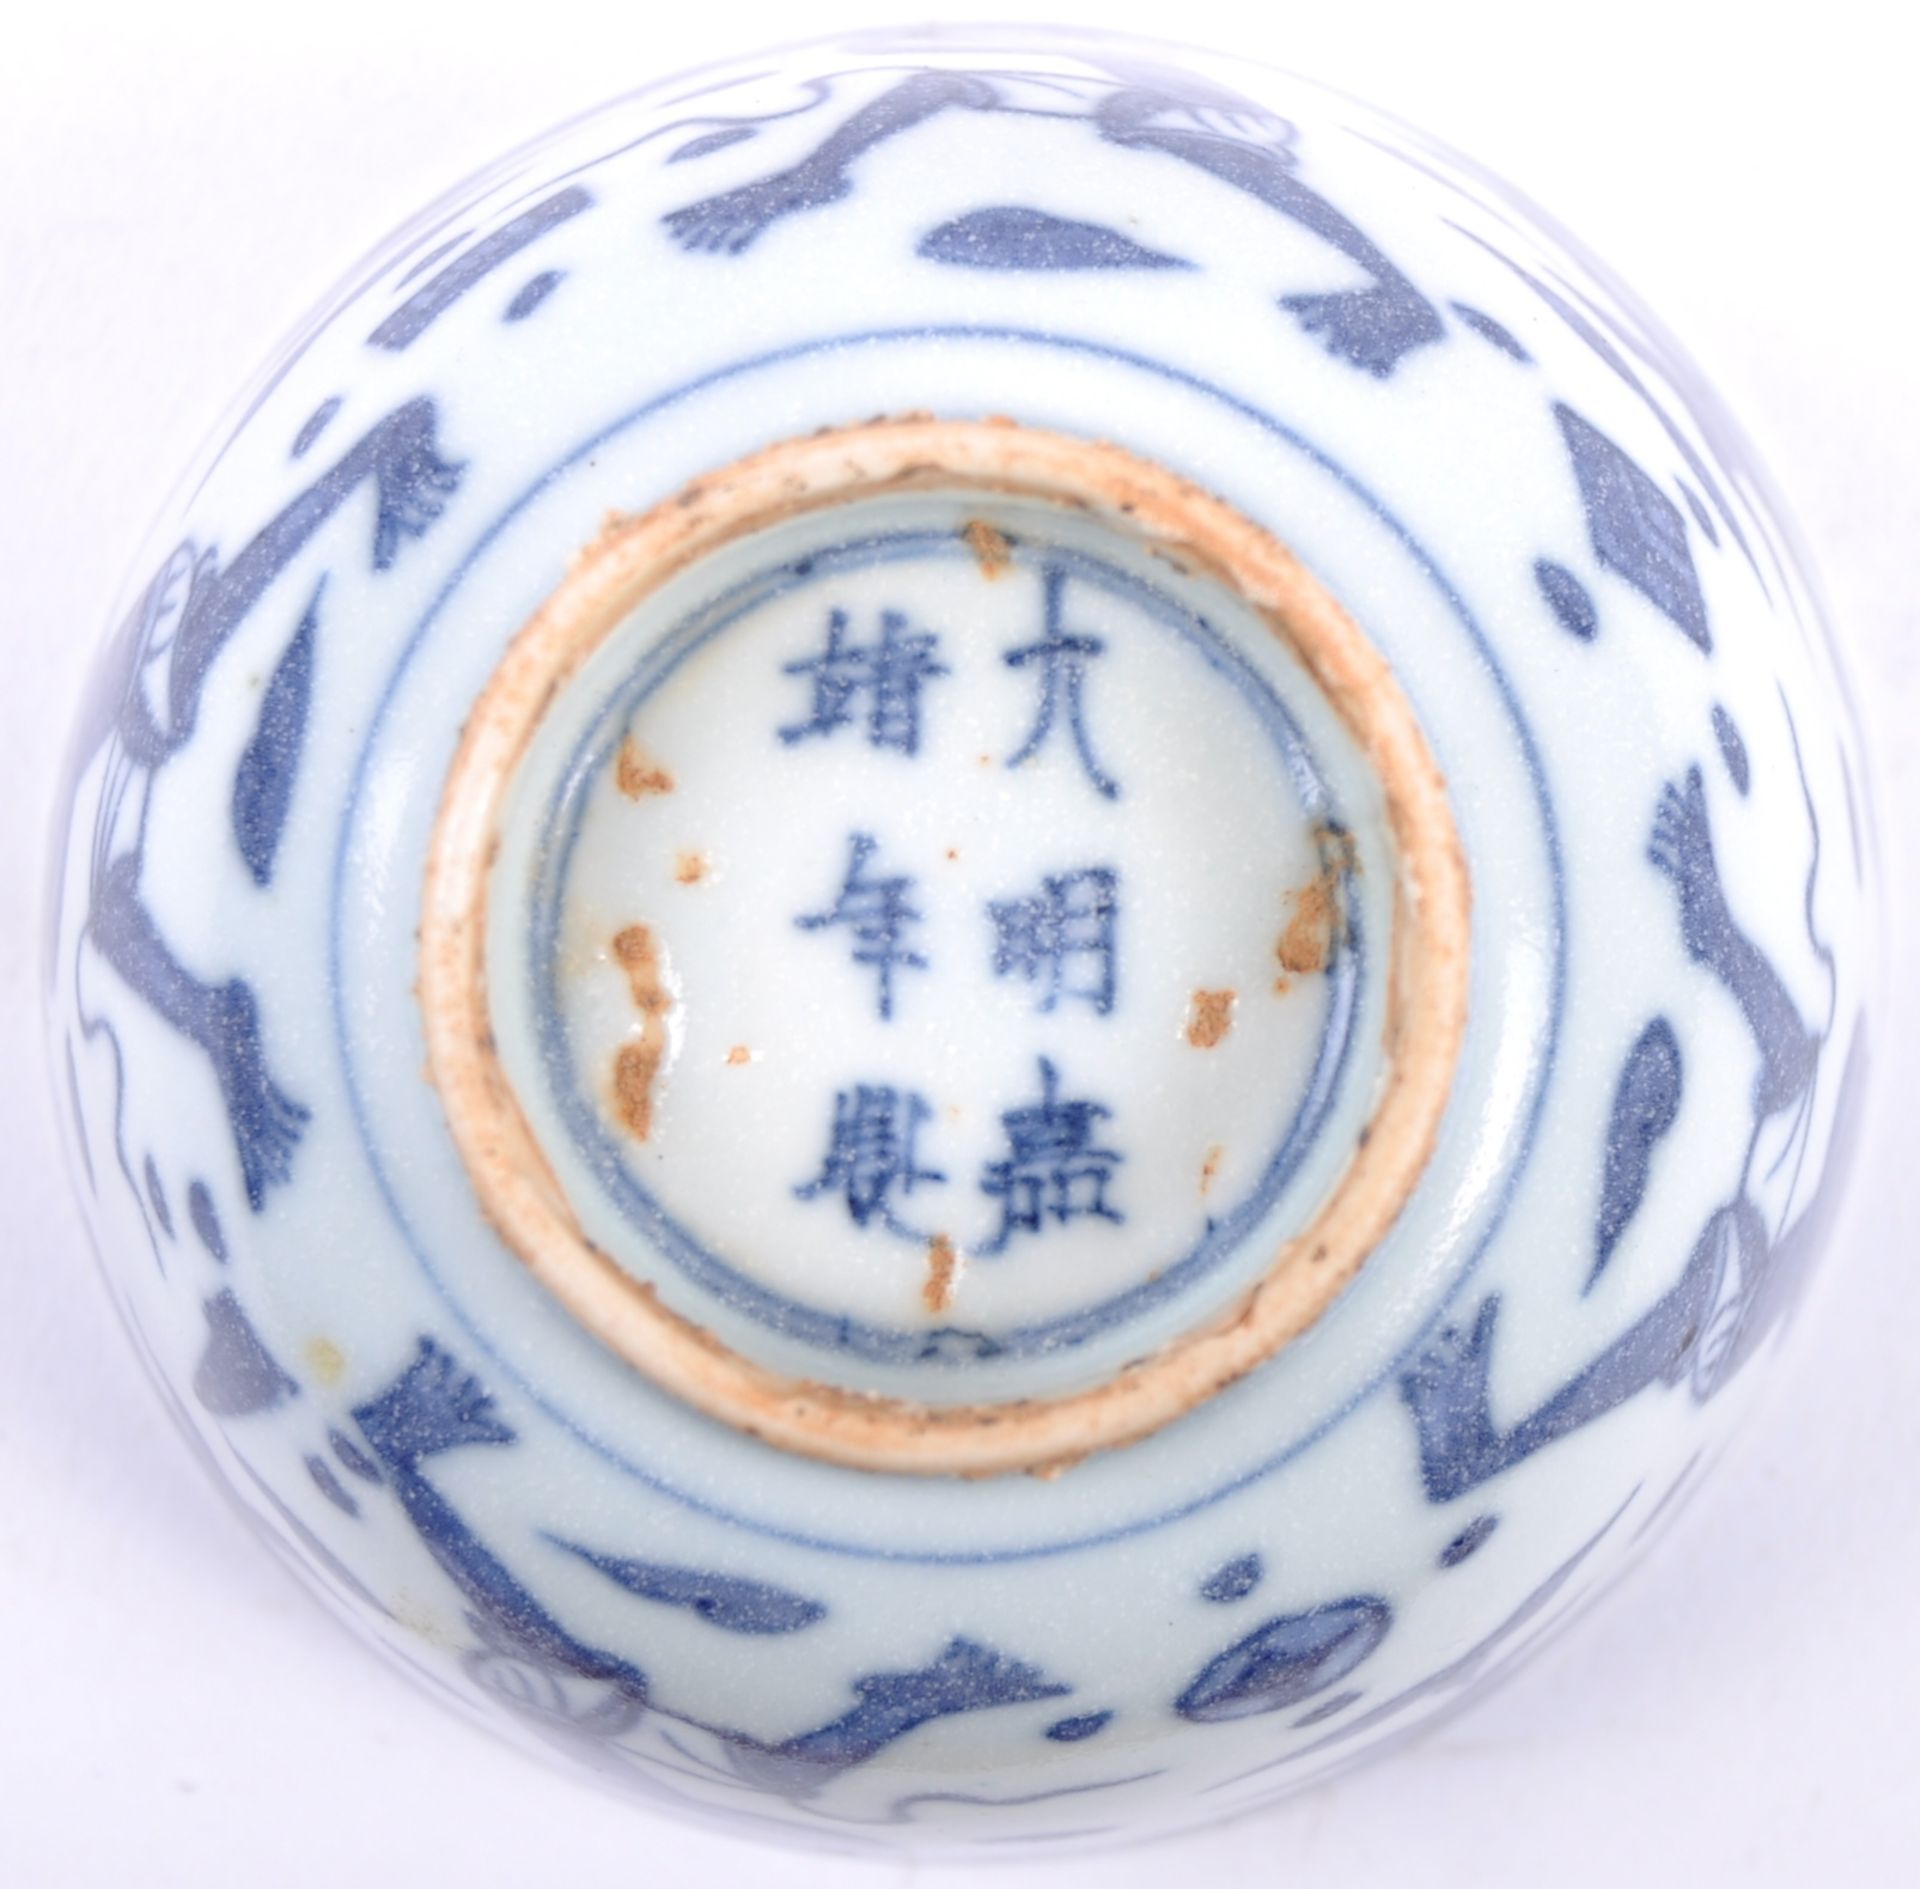 20TH CENTURY CHINESE MING MARK BOWL - Image 6 of 7